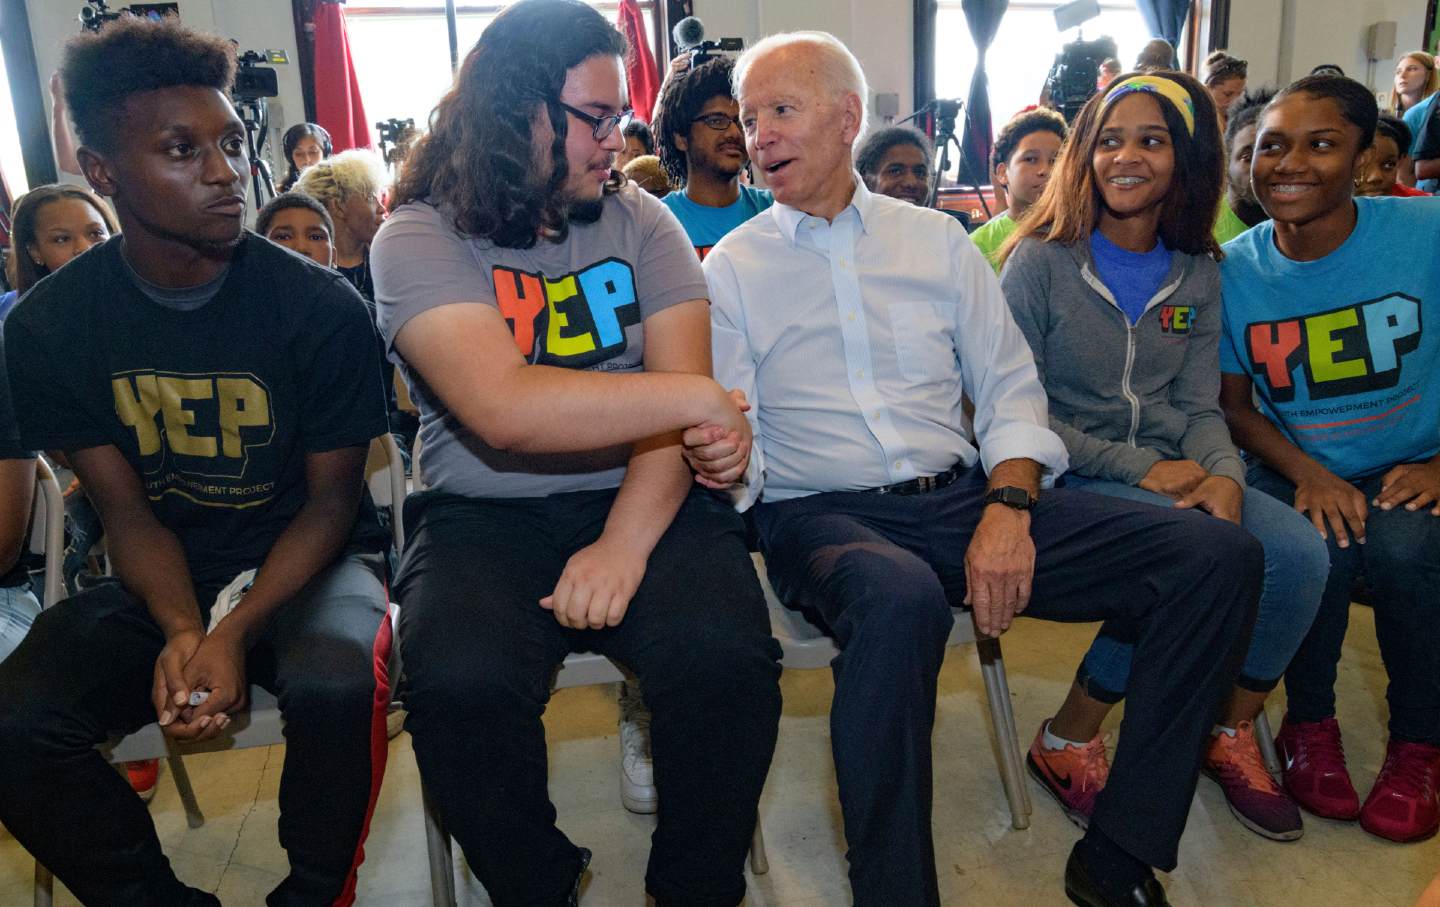 Biden shaking hands with a young voter